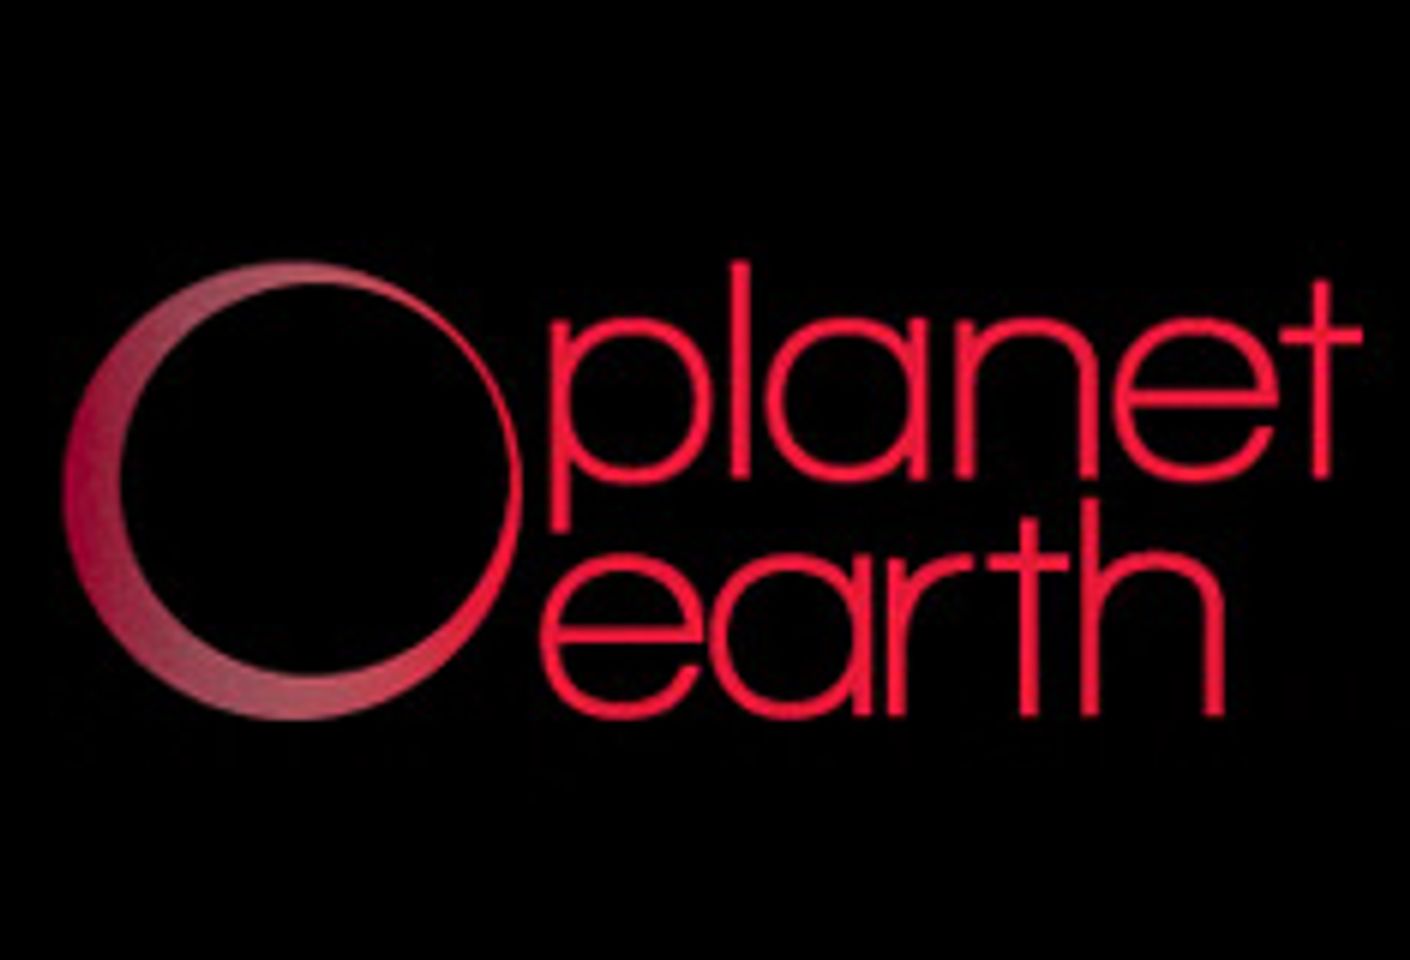 Planet Earth Adds Gun Oil Hybrid to Catalogue